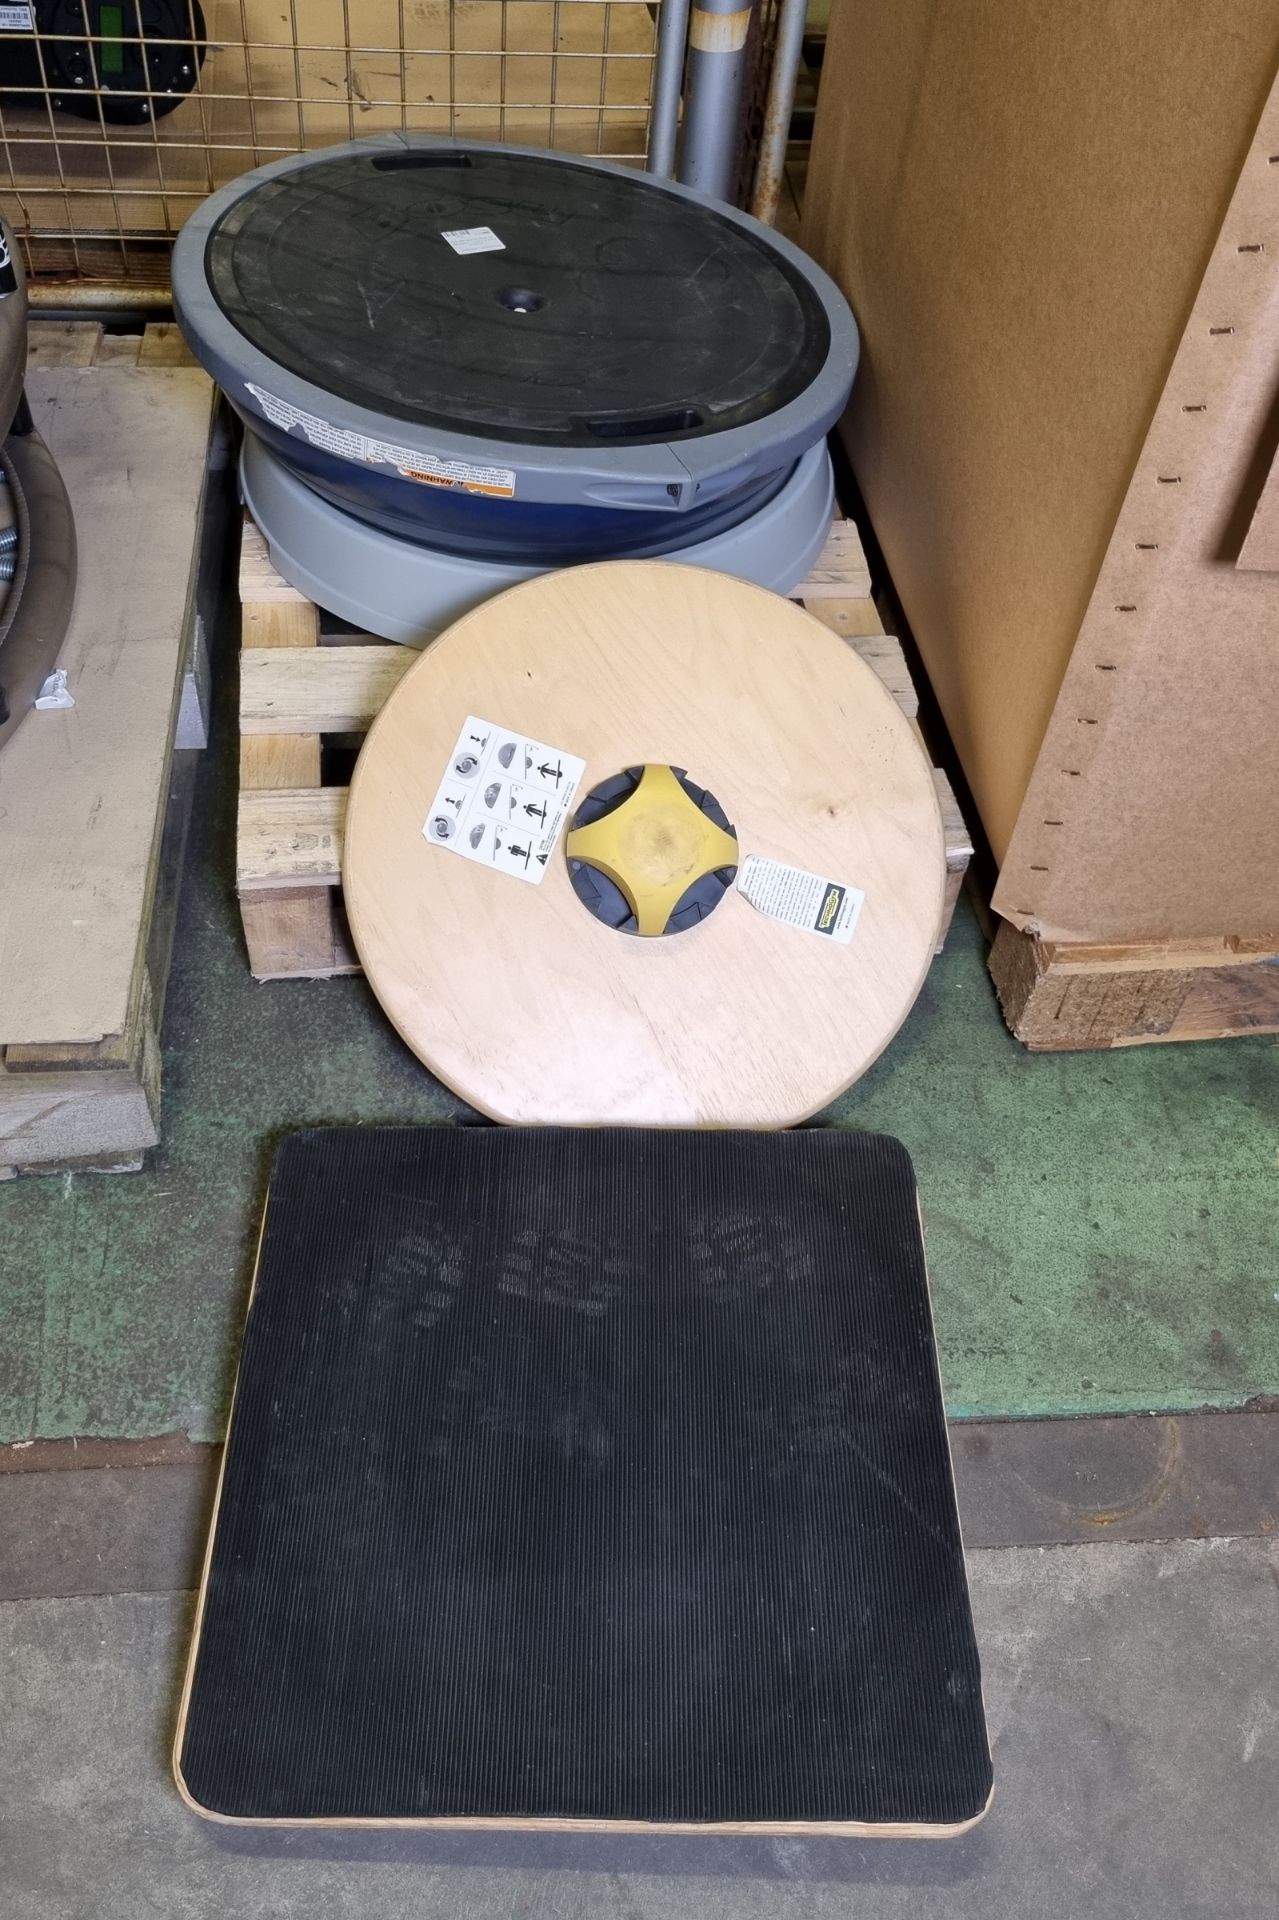 Rocker board - L 470 x W 470 x H 70mm, Wobble board - L 490 x W 490 x H 70mm - Image 2 of 3